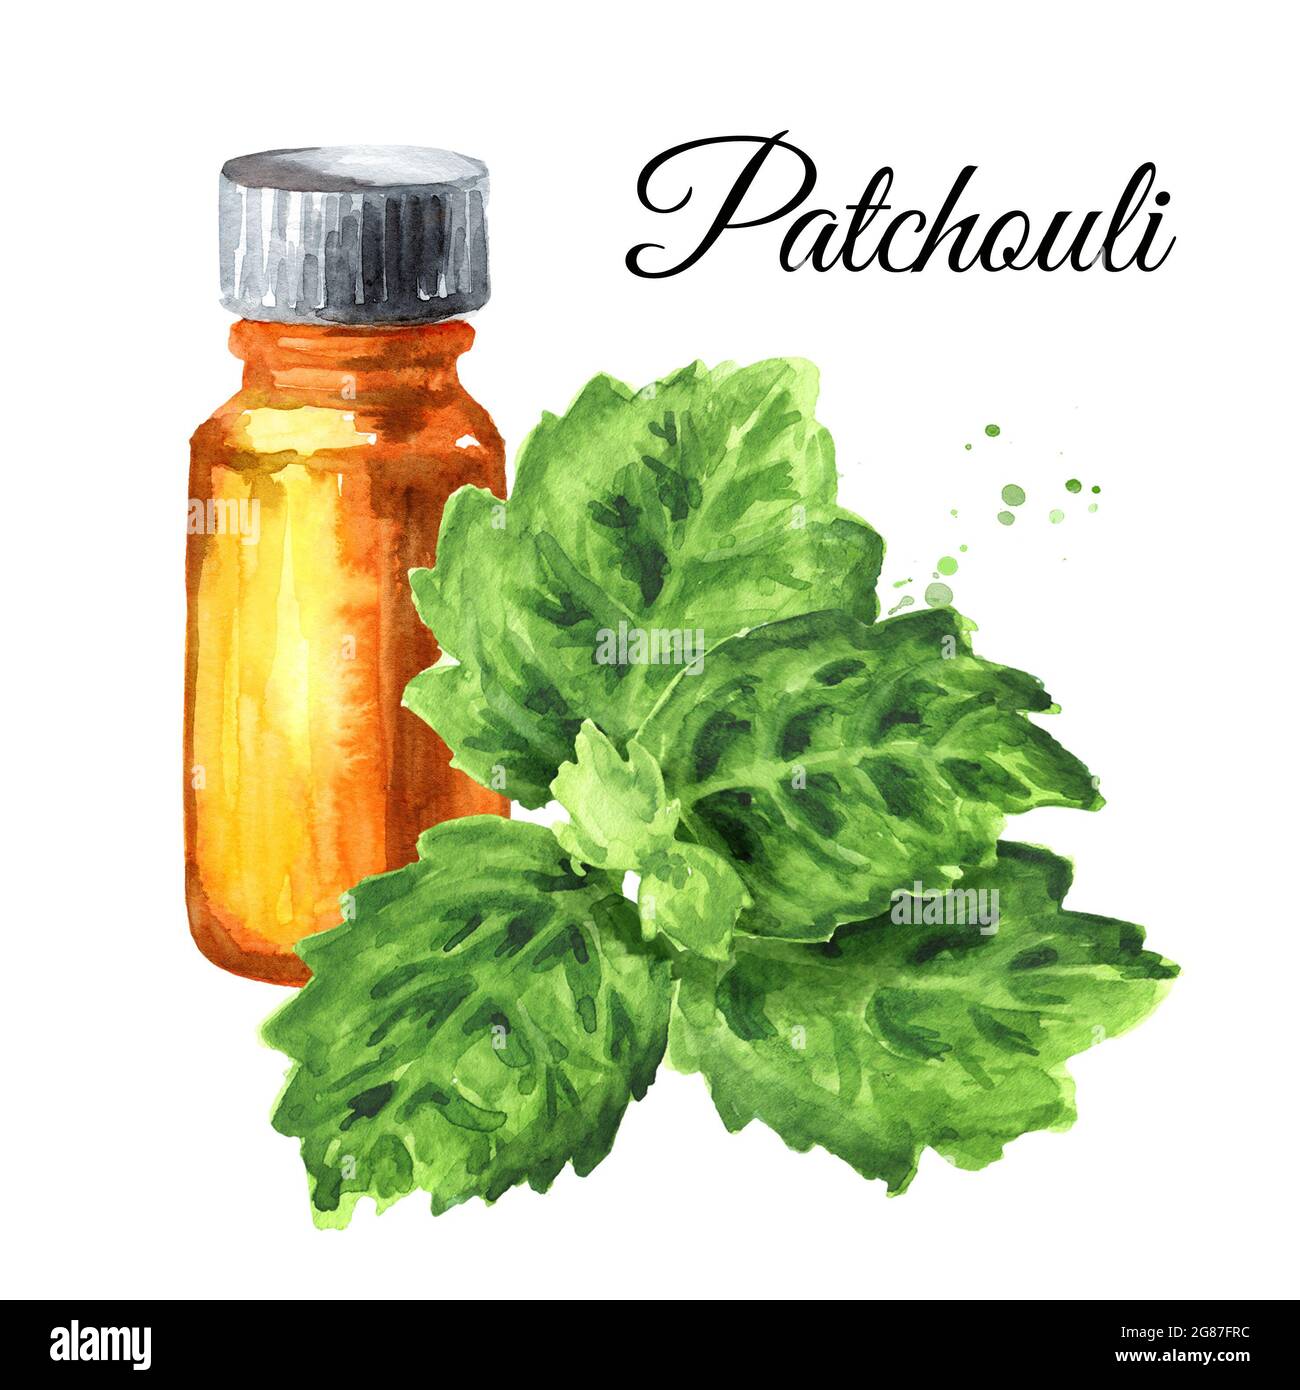 Patchouli or Pogostemon cablini essential oil. Hand drawn watercolor illustration, isolated on white background Stock Photo